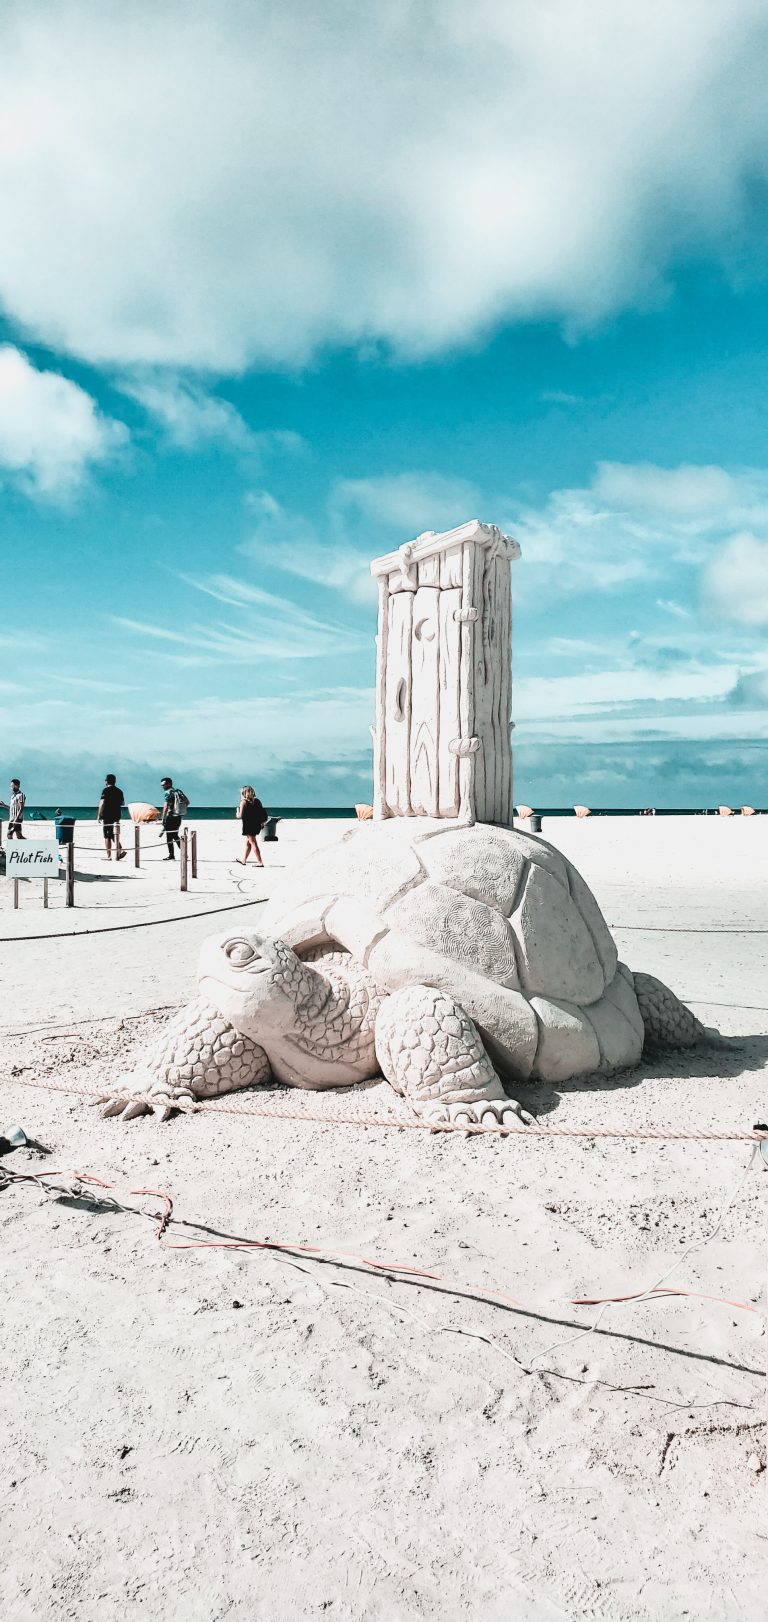 Anna Maria Island and Treasure Island: Which is Better?